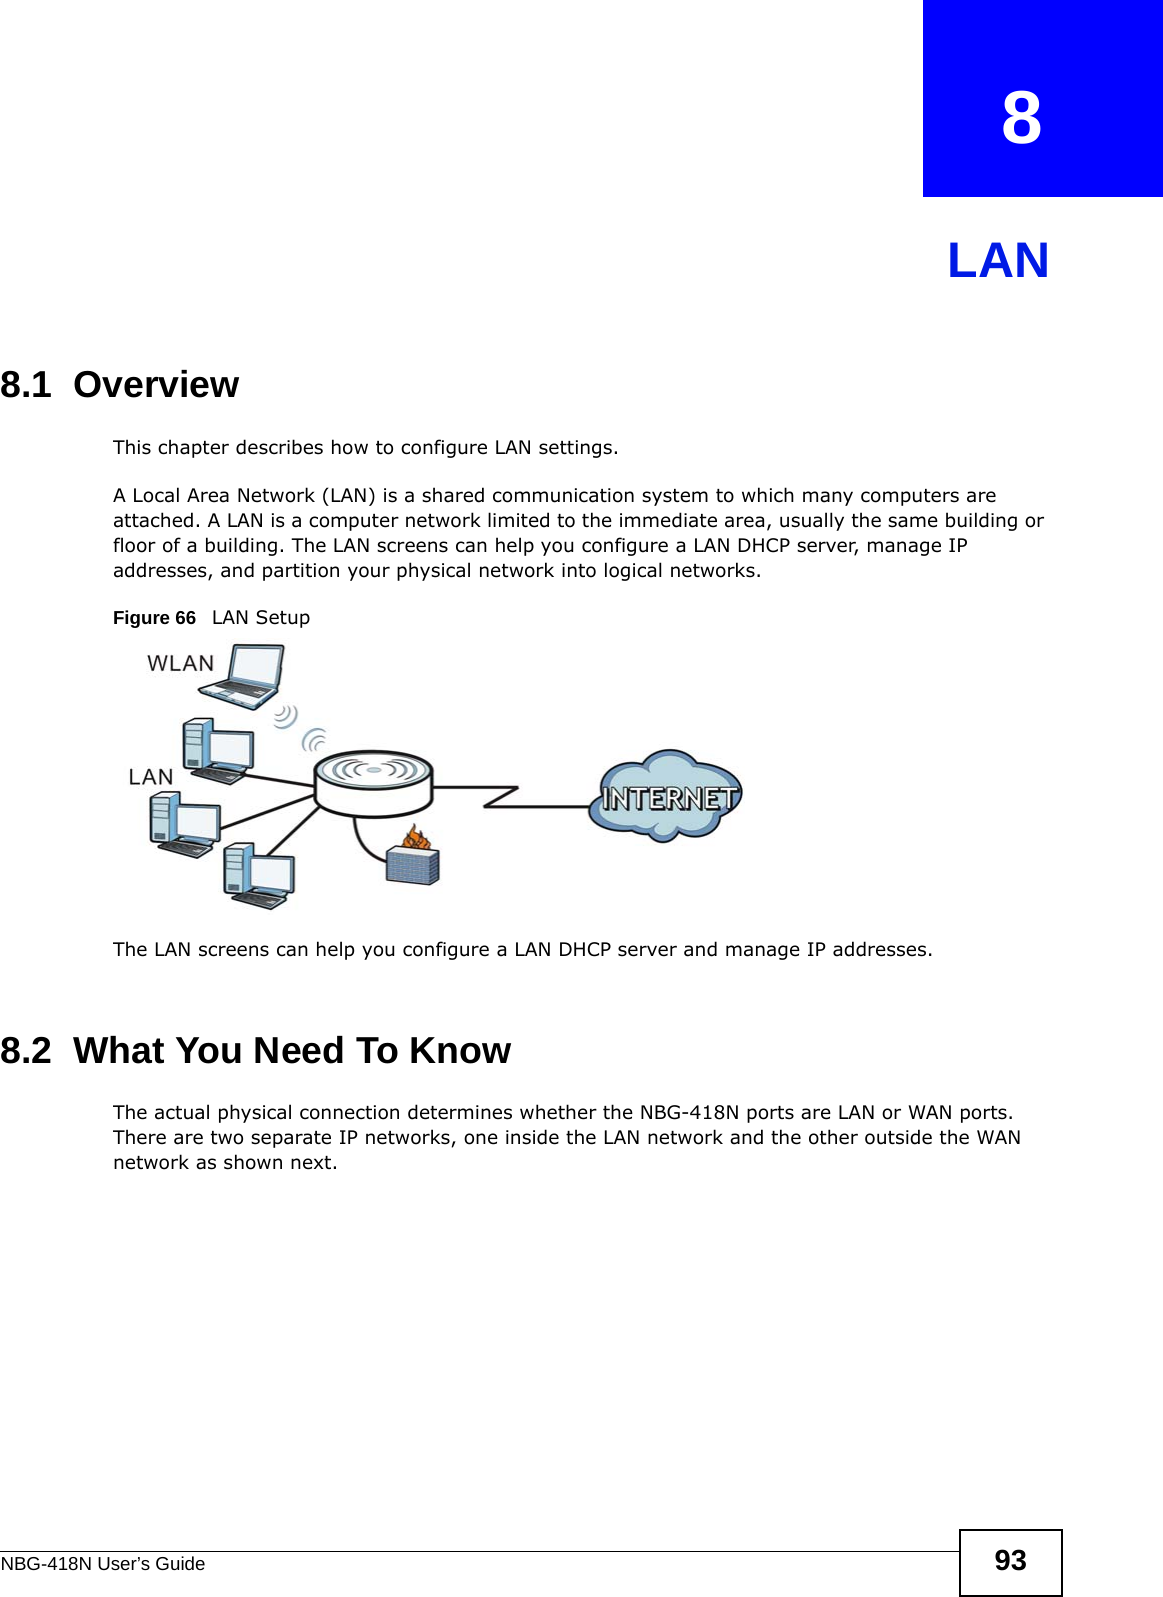 NBG-418N User’s Guide 93CHAPTER   8LAN8.1  OverviewThis chapter describes how to configure LAN settings.A Local Area Network (LAN) is a shared communication system to which many computers are attached. A LAN is a computer network limited to the immediate area, usually the same building or floor of a building. The LAN screens can help you configure a LAN DHCP server, manage IP addresses, and partition your physical network into logical networks.Figure 66   LAN SetupThe LAN screens can help you configure a LAN DHCP server and manage IP addresses.8.2  What You Need To KnowThe actual physical connection determines whether the NBG-418N ports are LAN or WAN ports. There are two separate IP networks, one inside the LAN network and the other outside the WAN network as shown next.